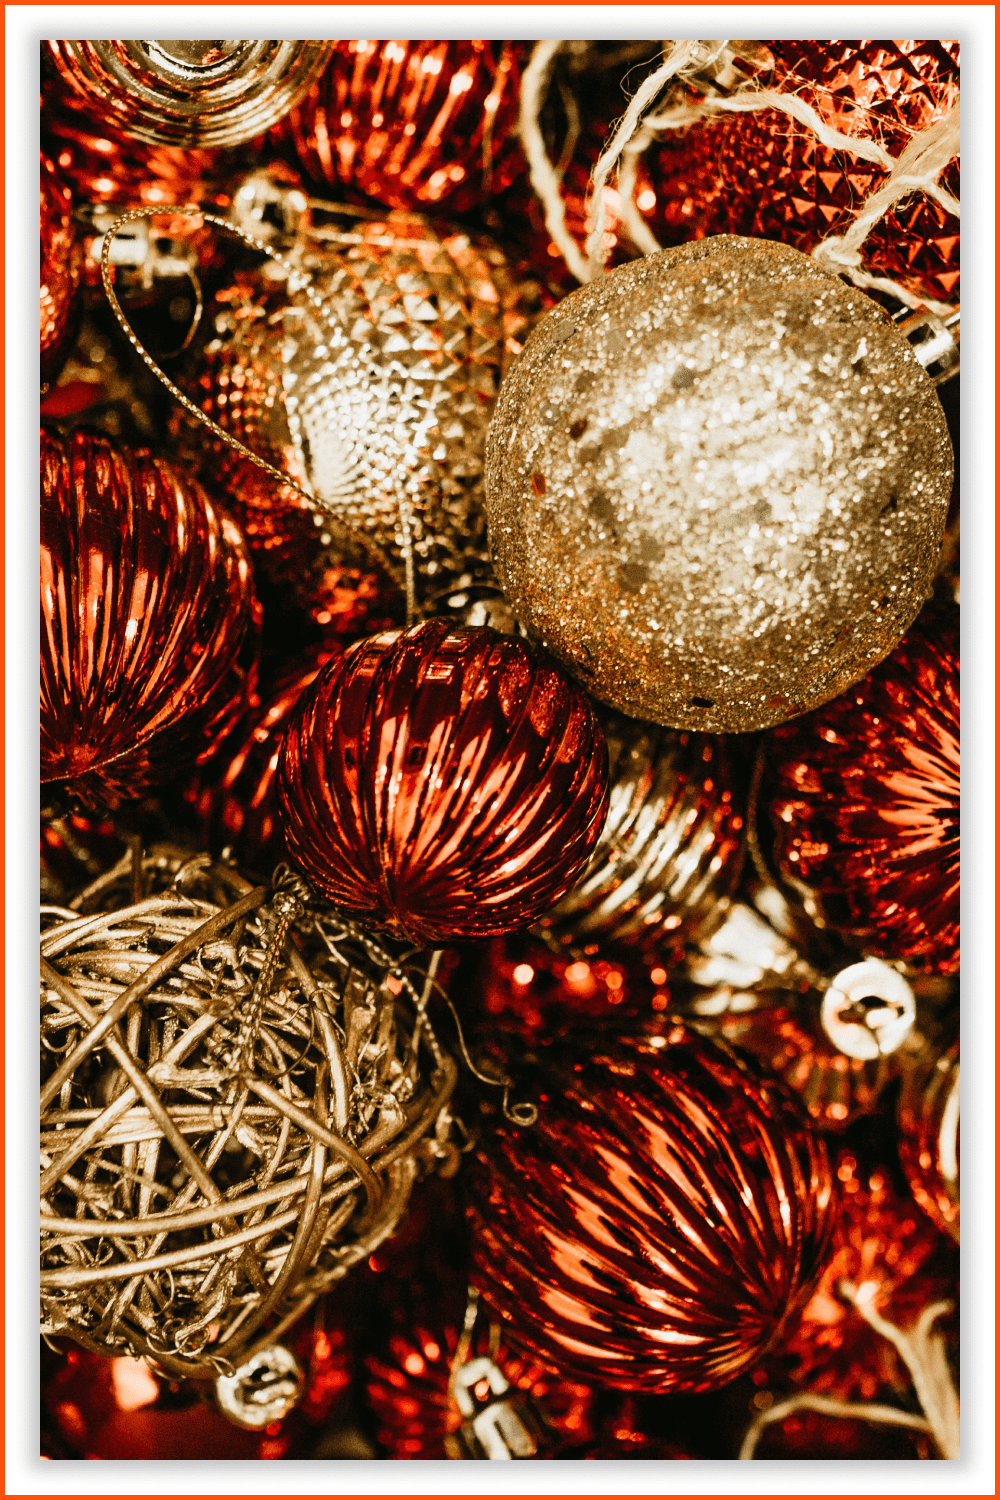 Photo of many baubles of different shapes in red and golden colors.